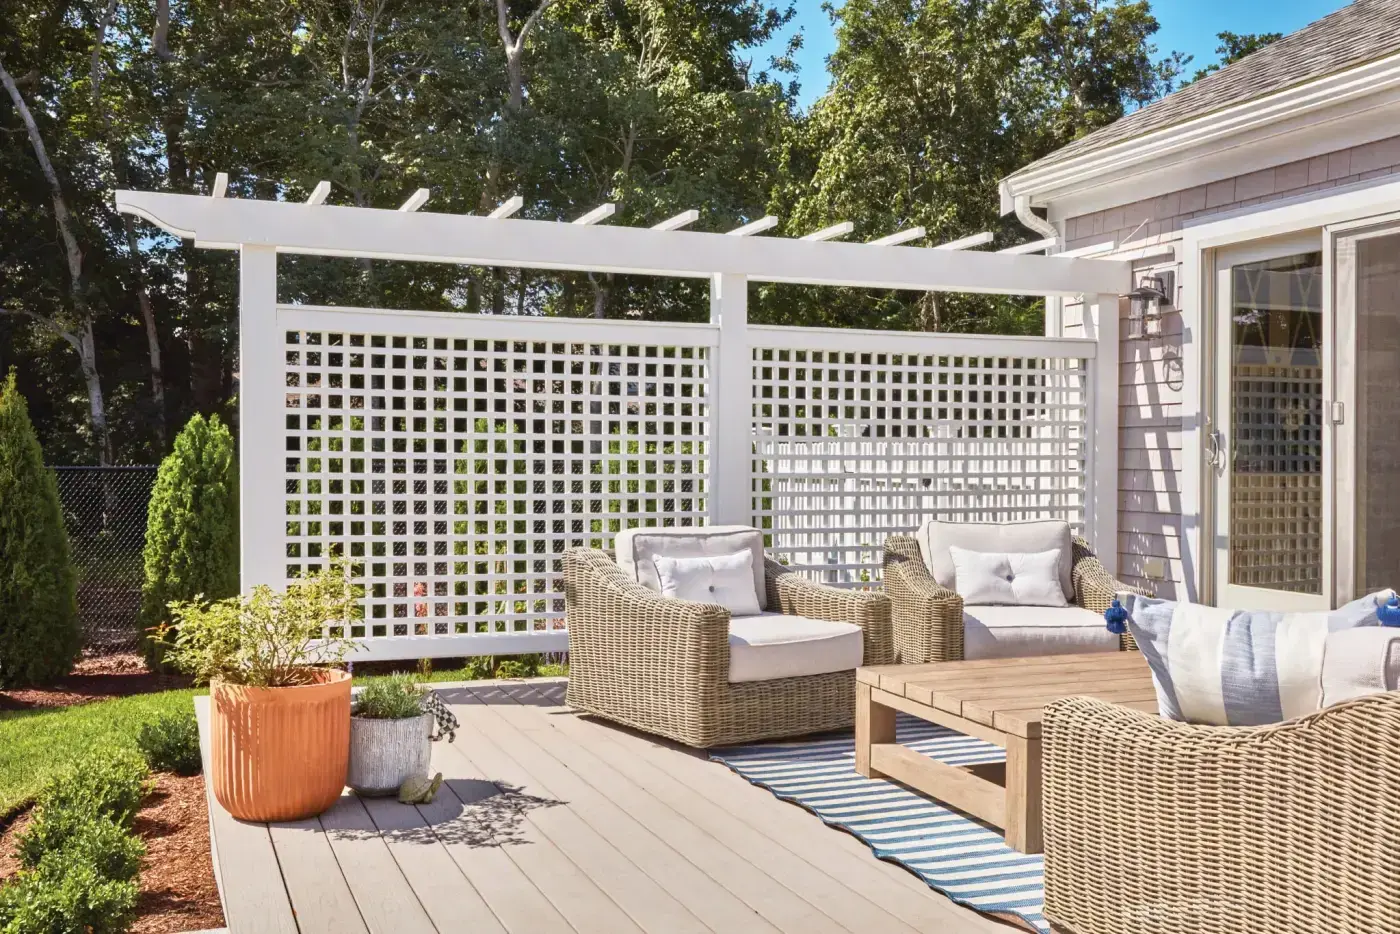 As the allure of outdoor living spaces continues to grow, homeowners are seeking innovative ways to enhance their gardens and backyards.